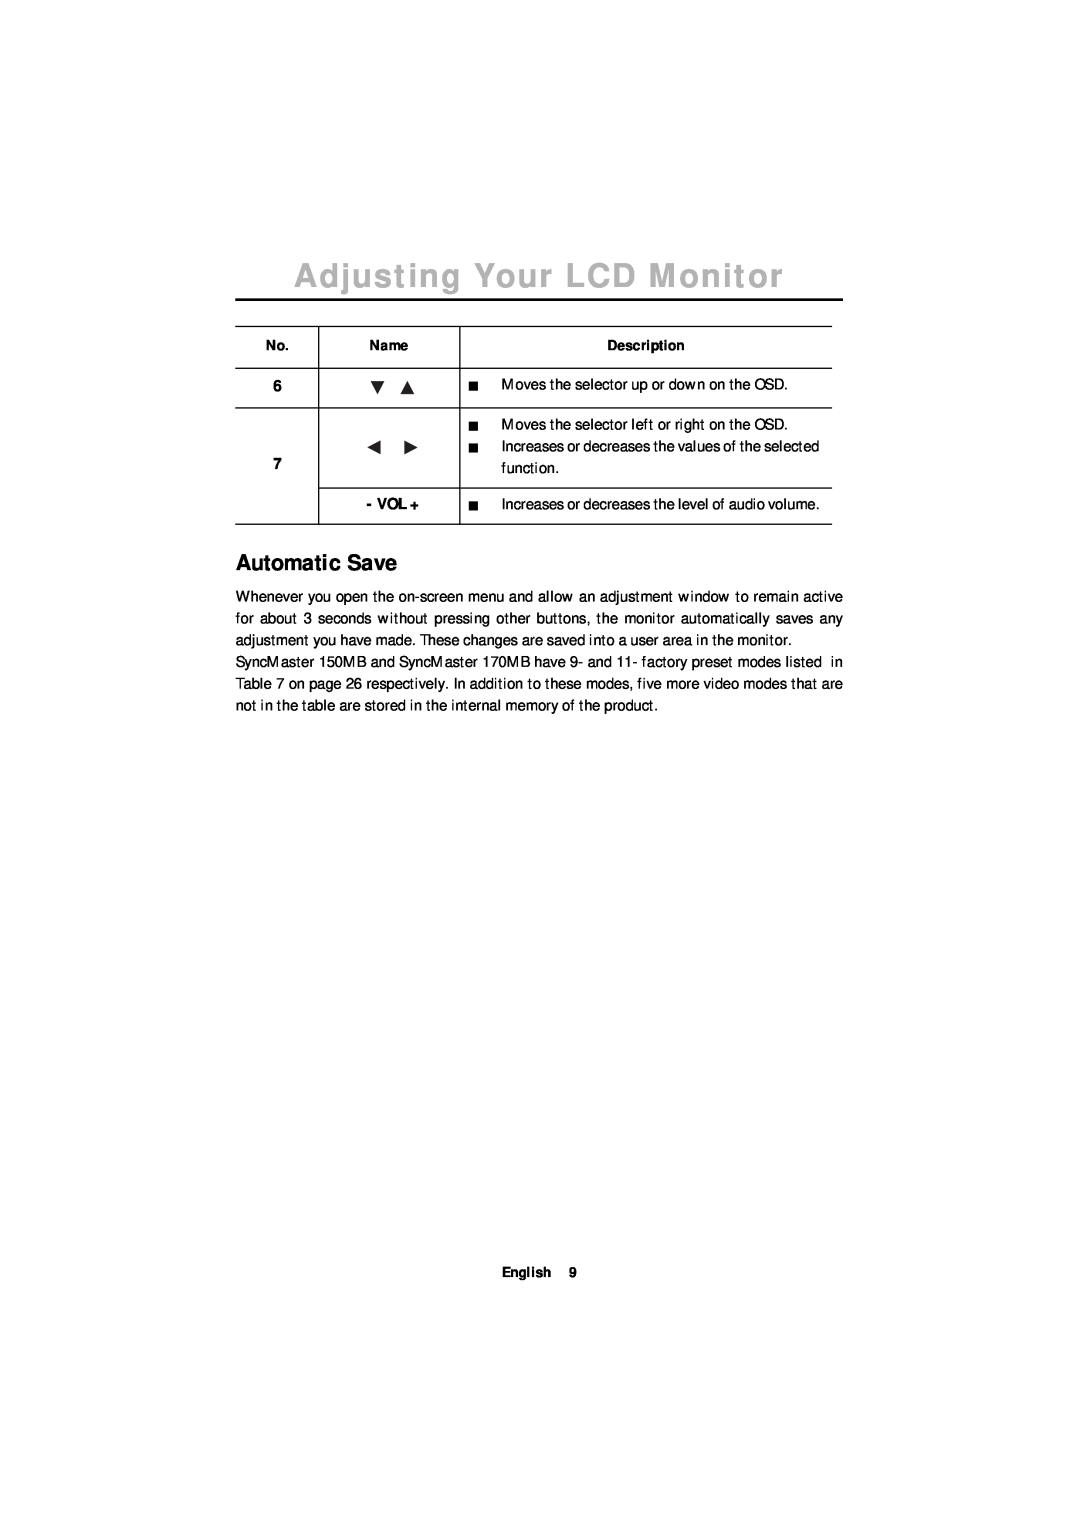 Samsung ML17XSSSS Automatic Save, Moves the selector up or down on the OSD, Vol +, Adjusting Your LCD Monitor, Description 